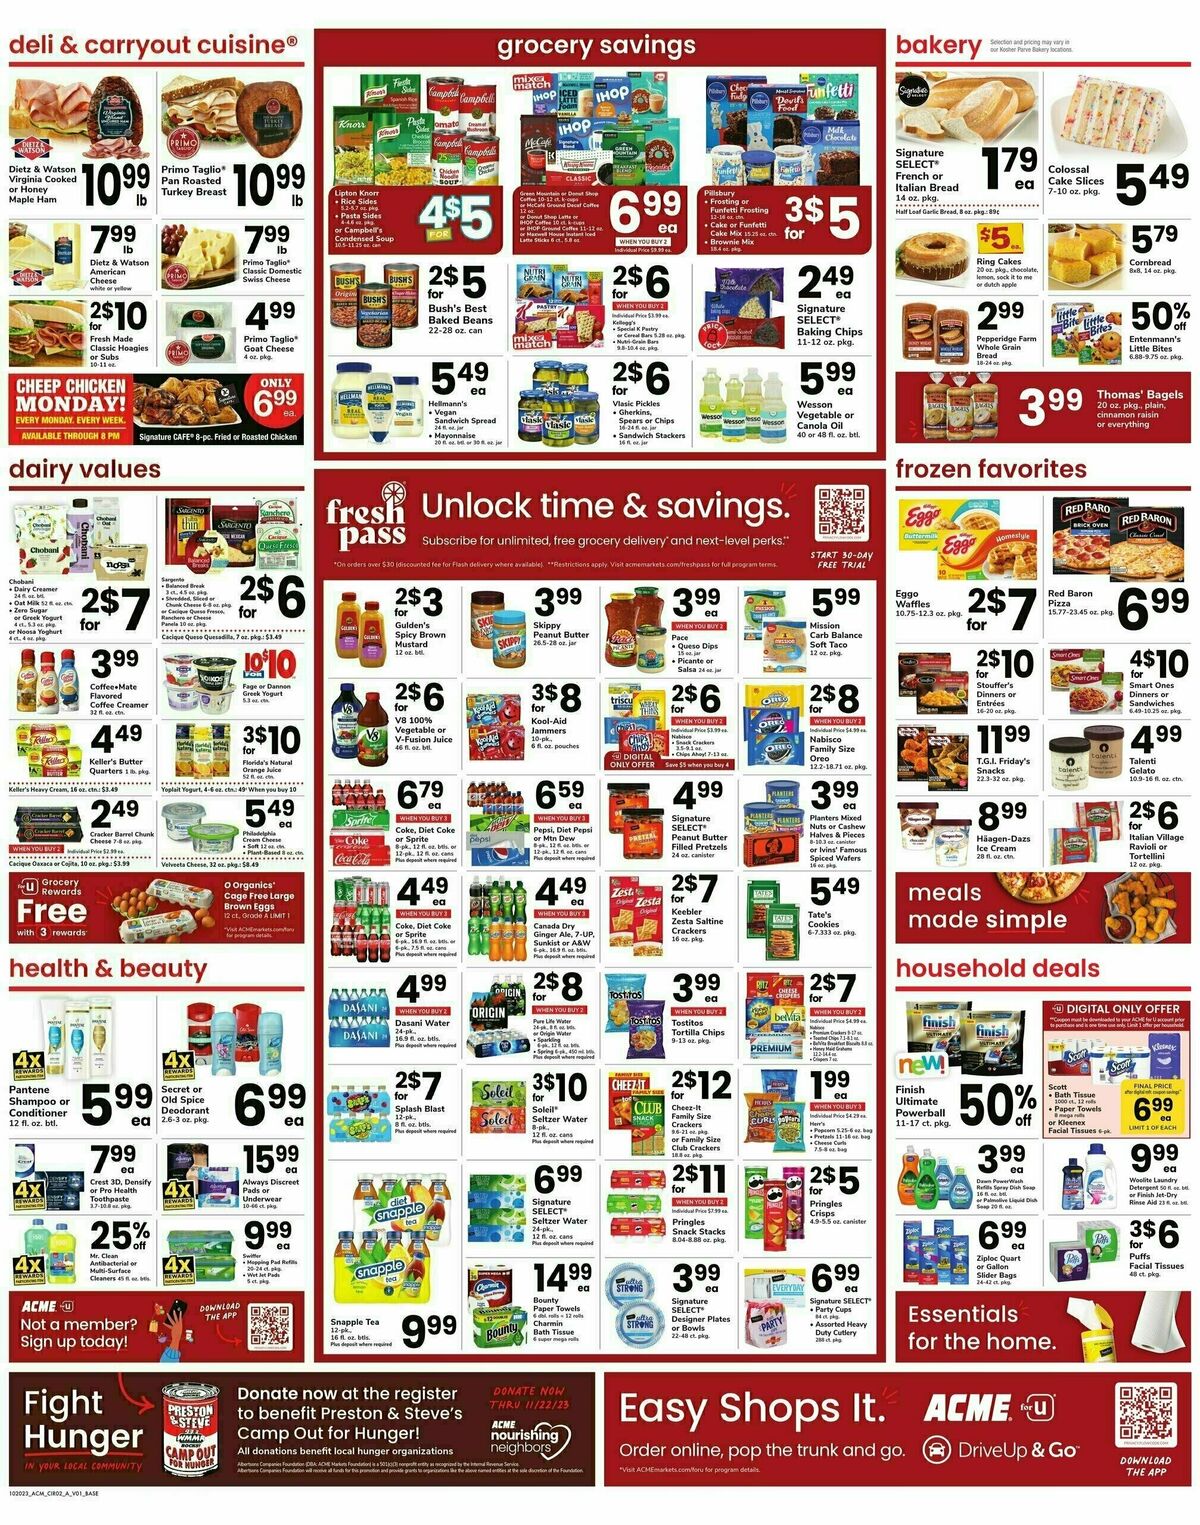 ACME Markets Weekly Ad from October 20